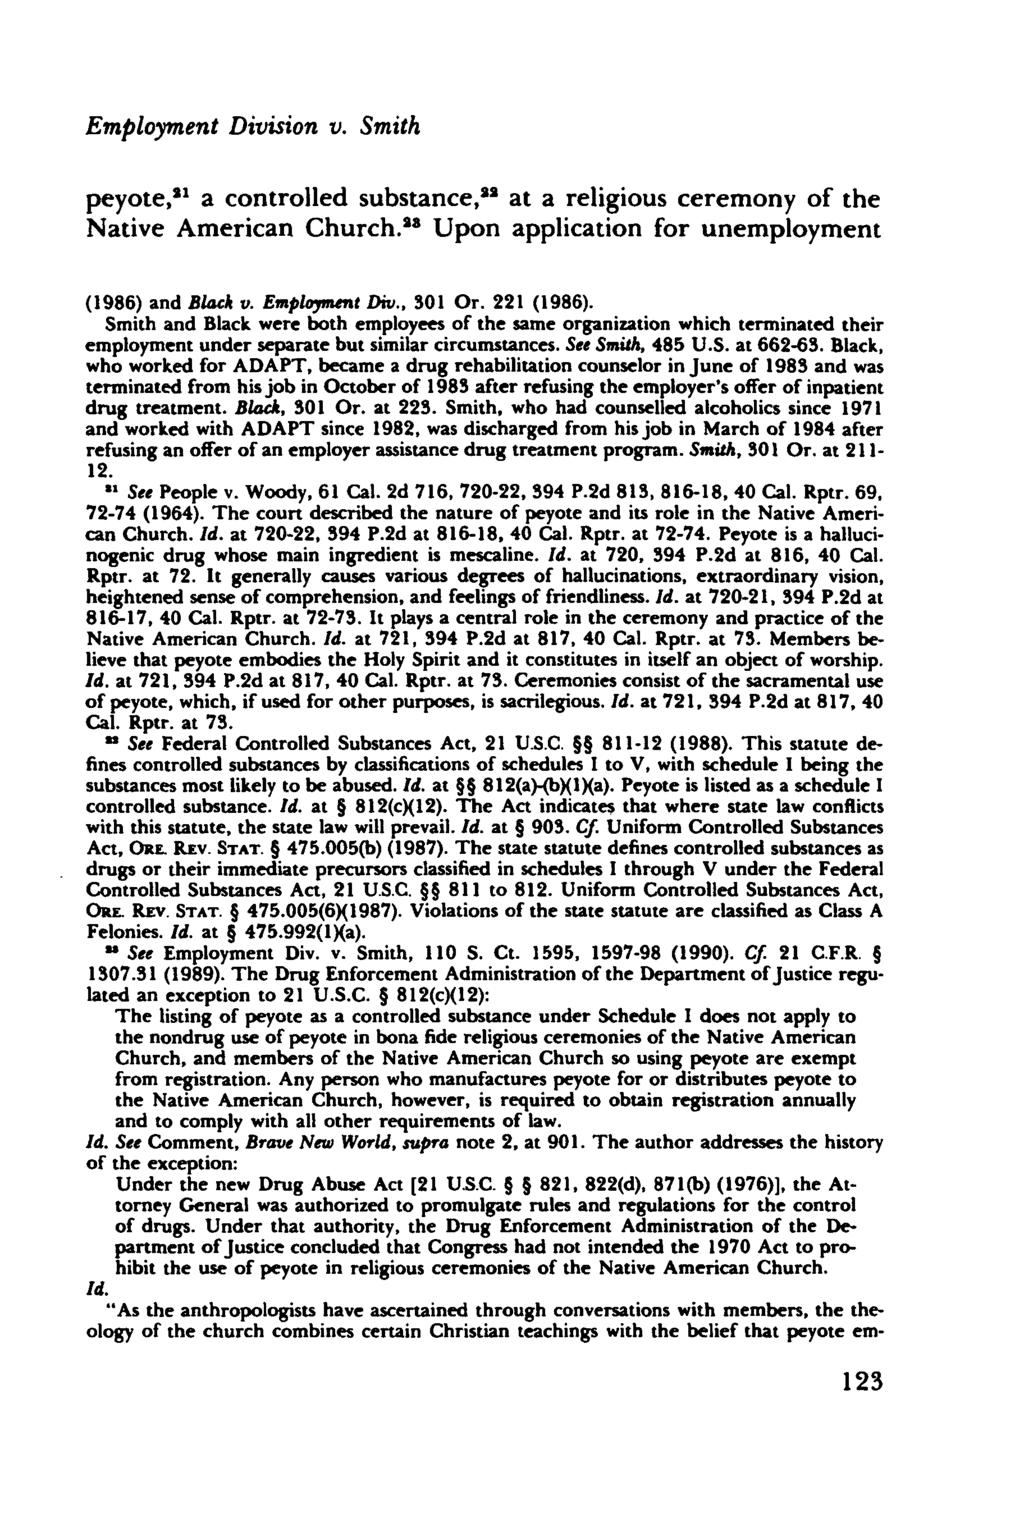 Employment Division v. Smith peyote, 21 a controlled substance, 2 at a religious ceremony of the Native American Church. 28 Upon application for unemployment (1986) and Black v. Employment Div.